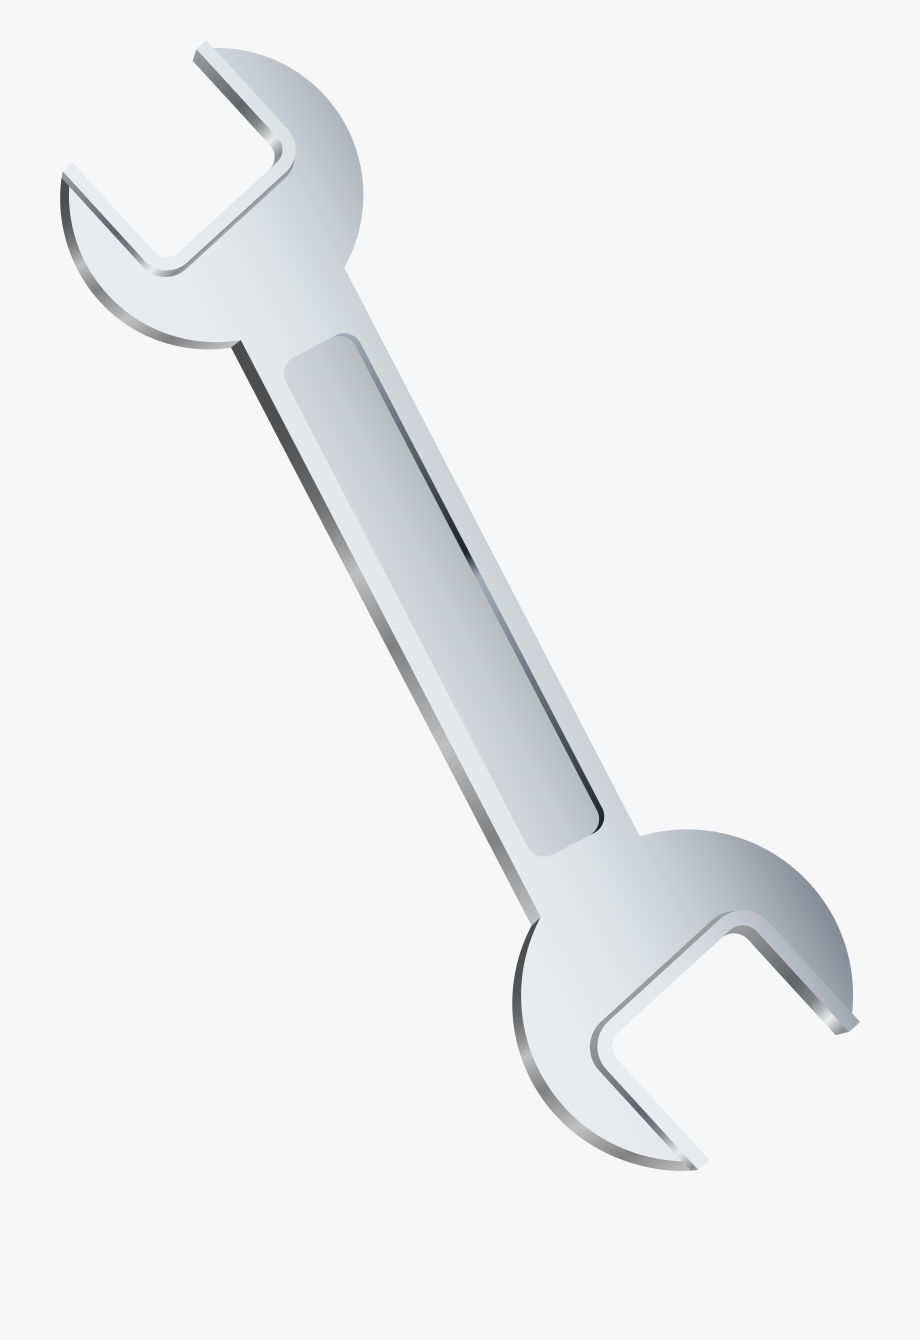 Wrench clipart metal.